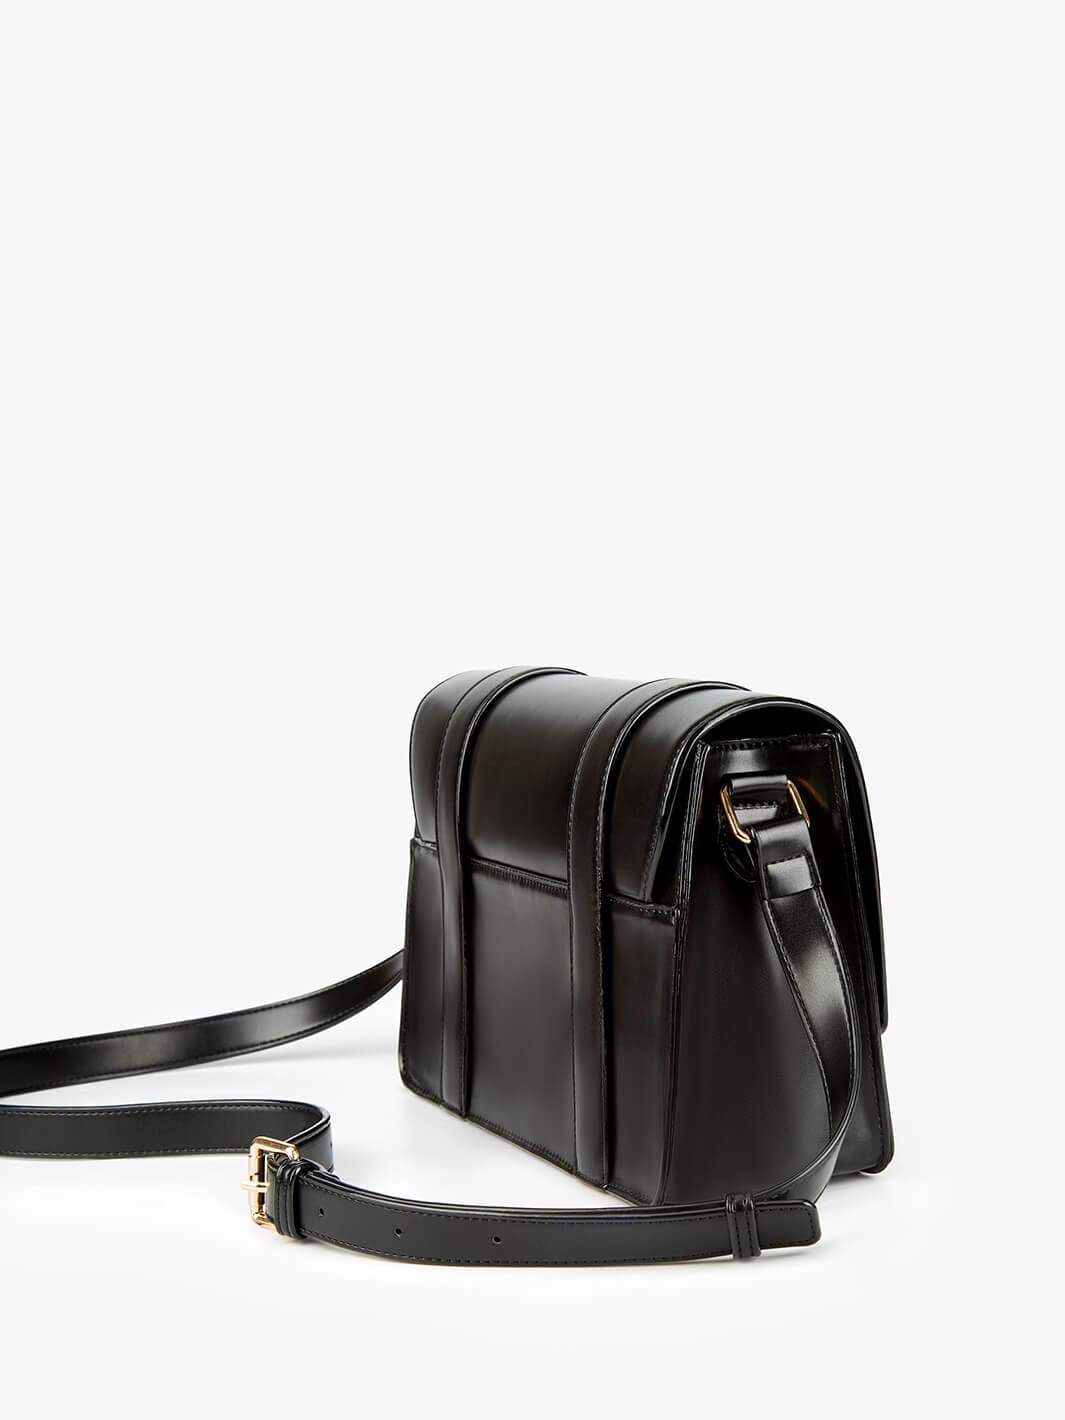 Leather Crossbody Bags with Adjustable Shoulder Strap